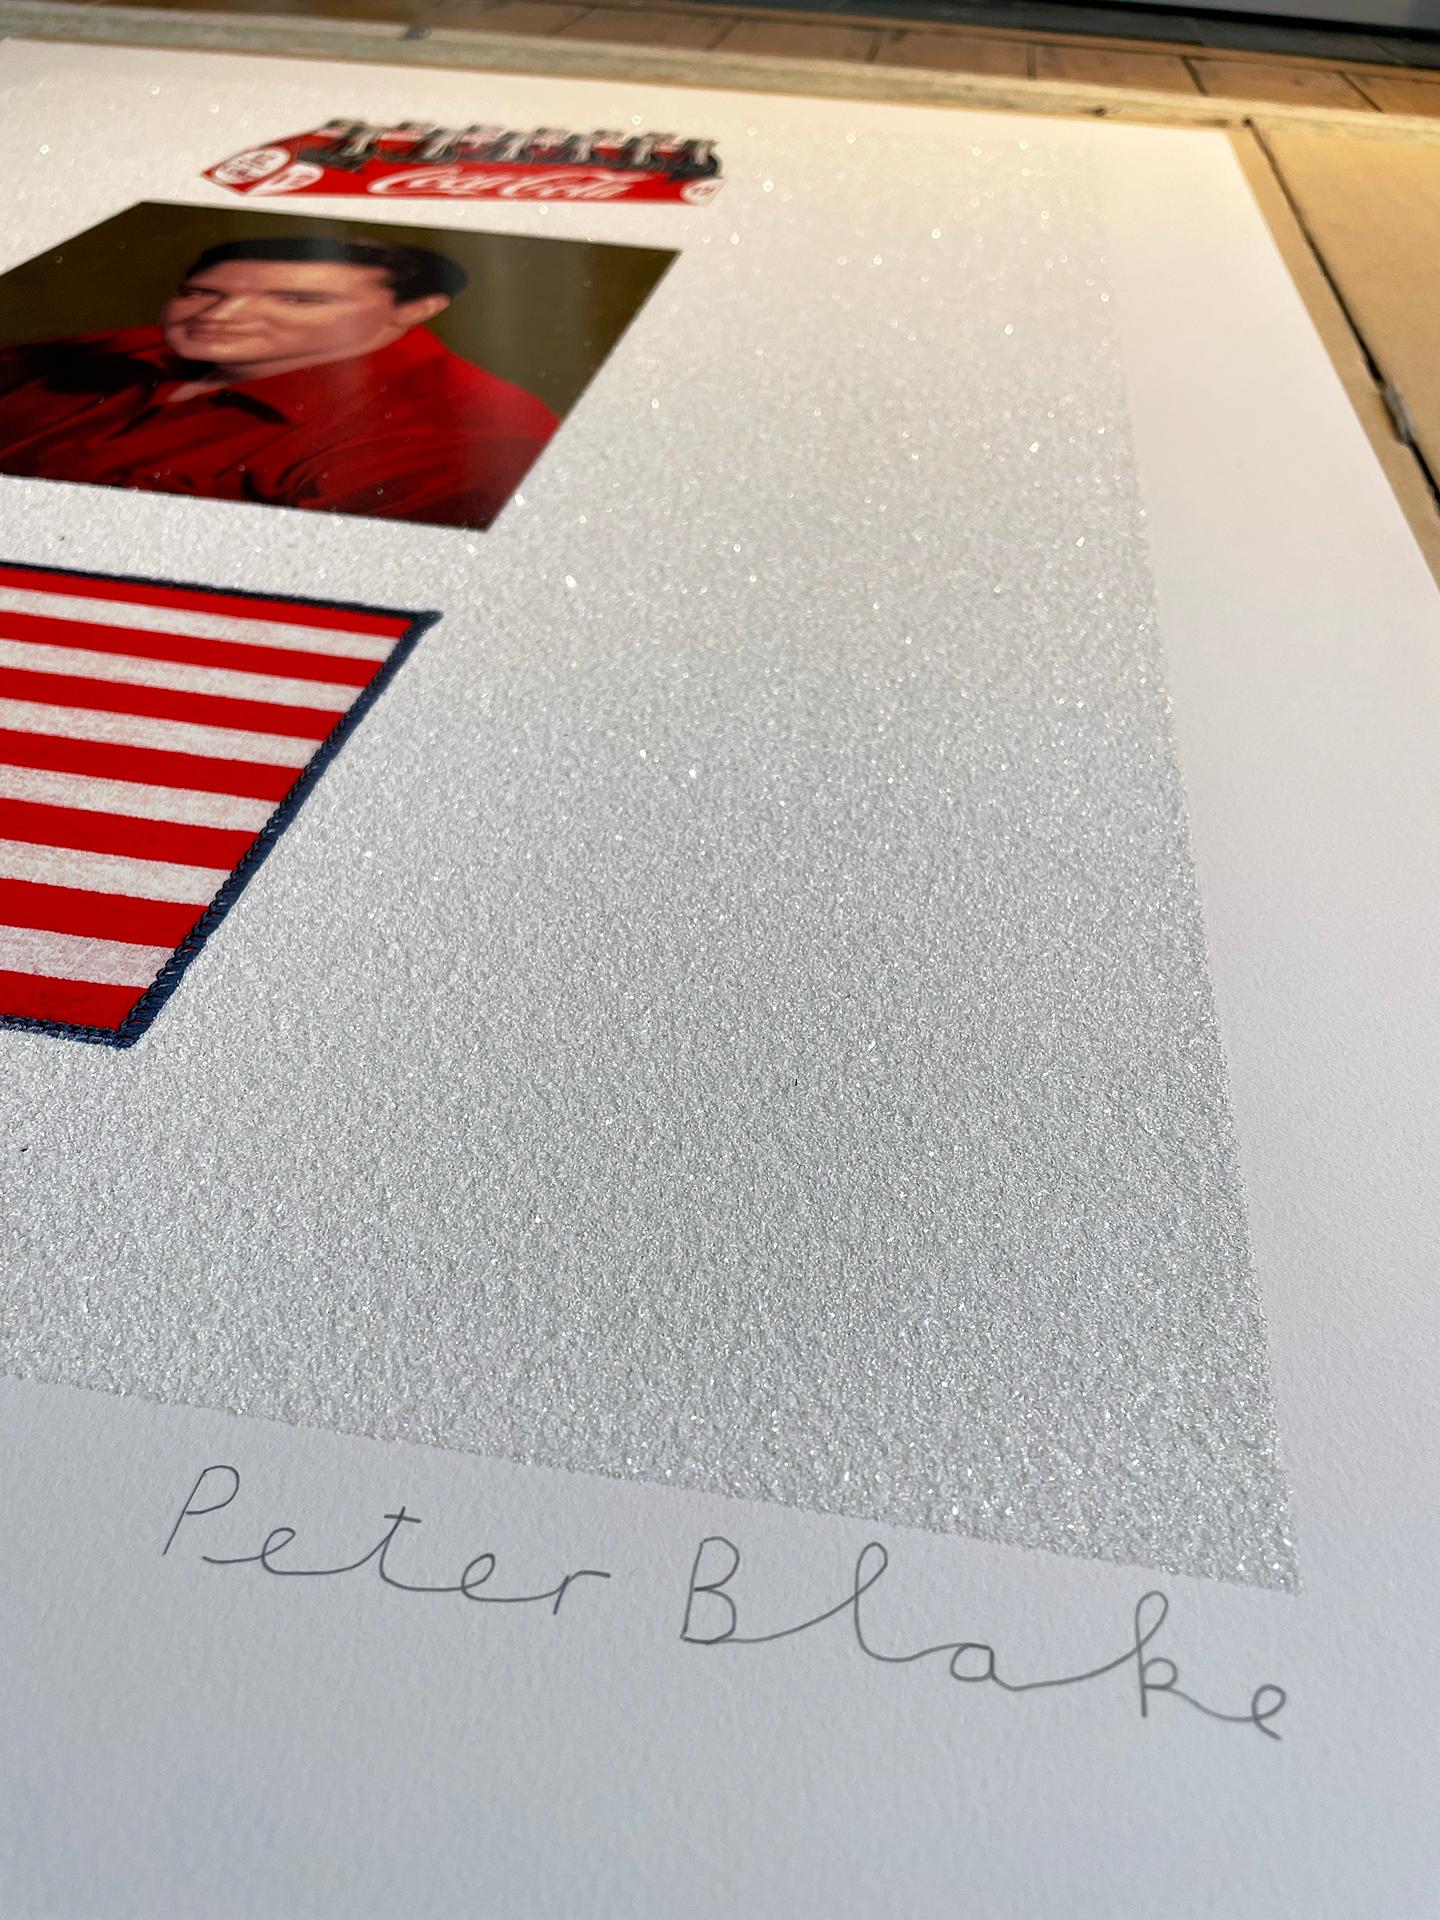 Limited edition of 150. Three American icons: the stars and stripes, Elvis Presley and Coca Cola are combined to create American Trilogy, a classic pop art image by Sir Peter Blake.American Trilogy celebrates the roots of Pop Art; featuring imagery